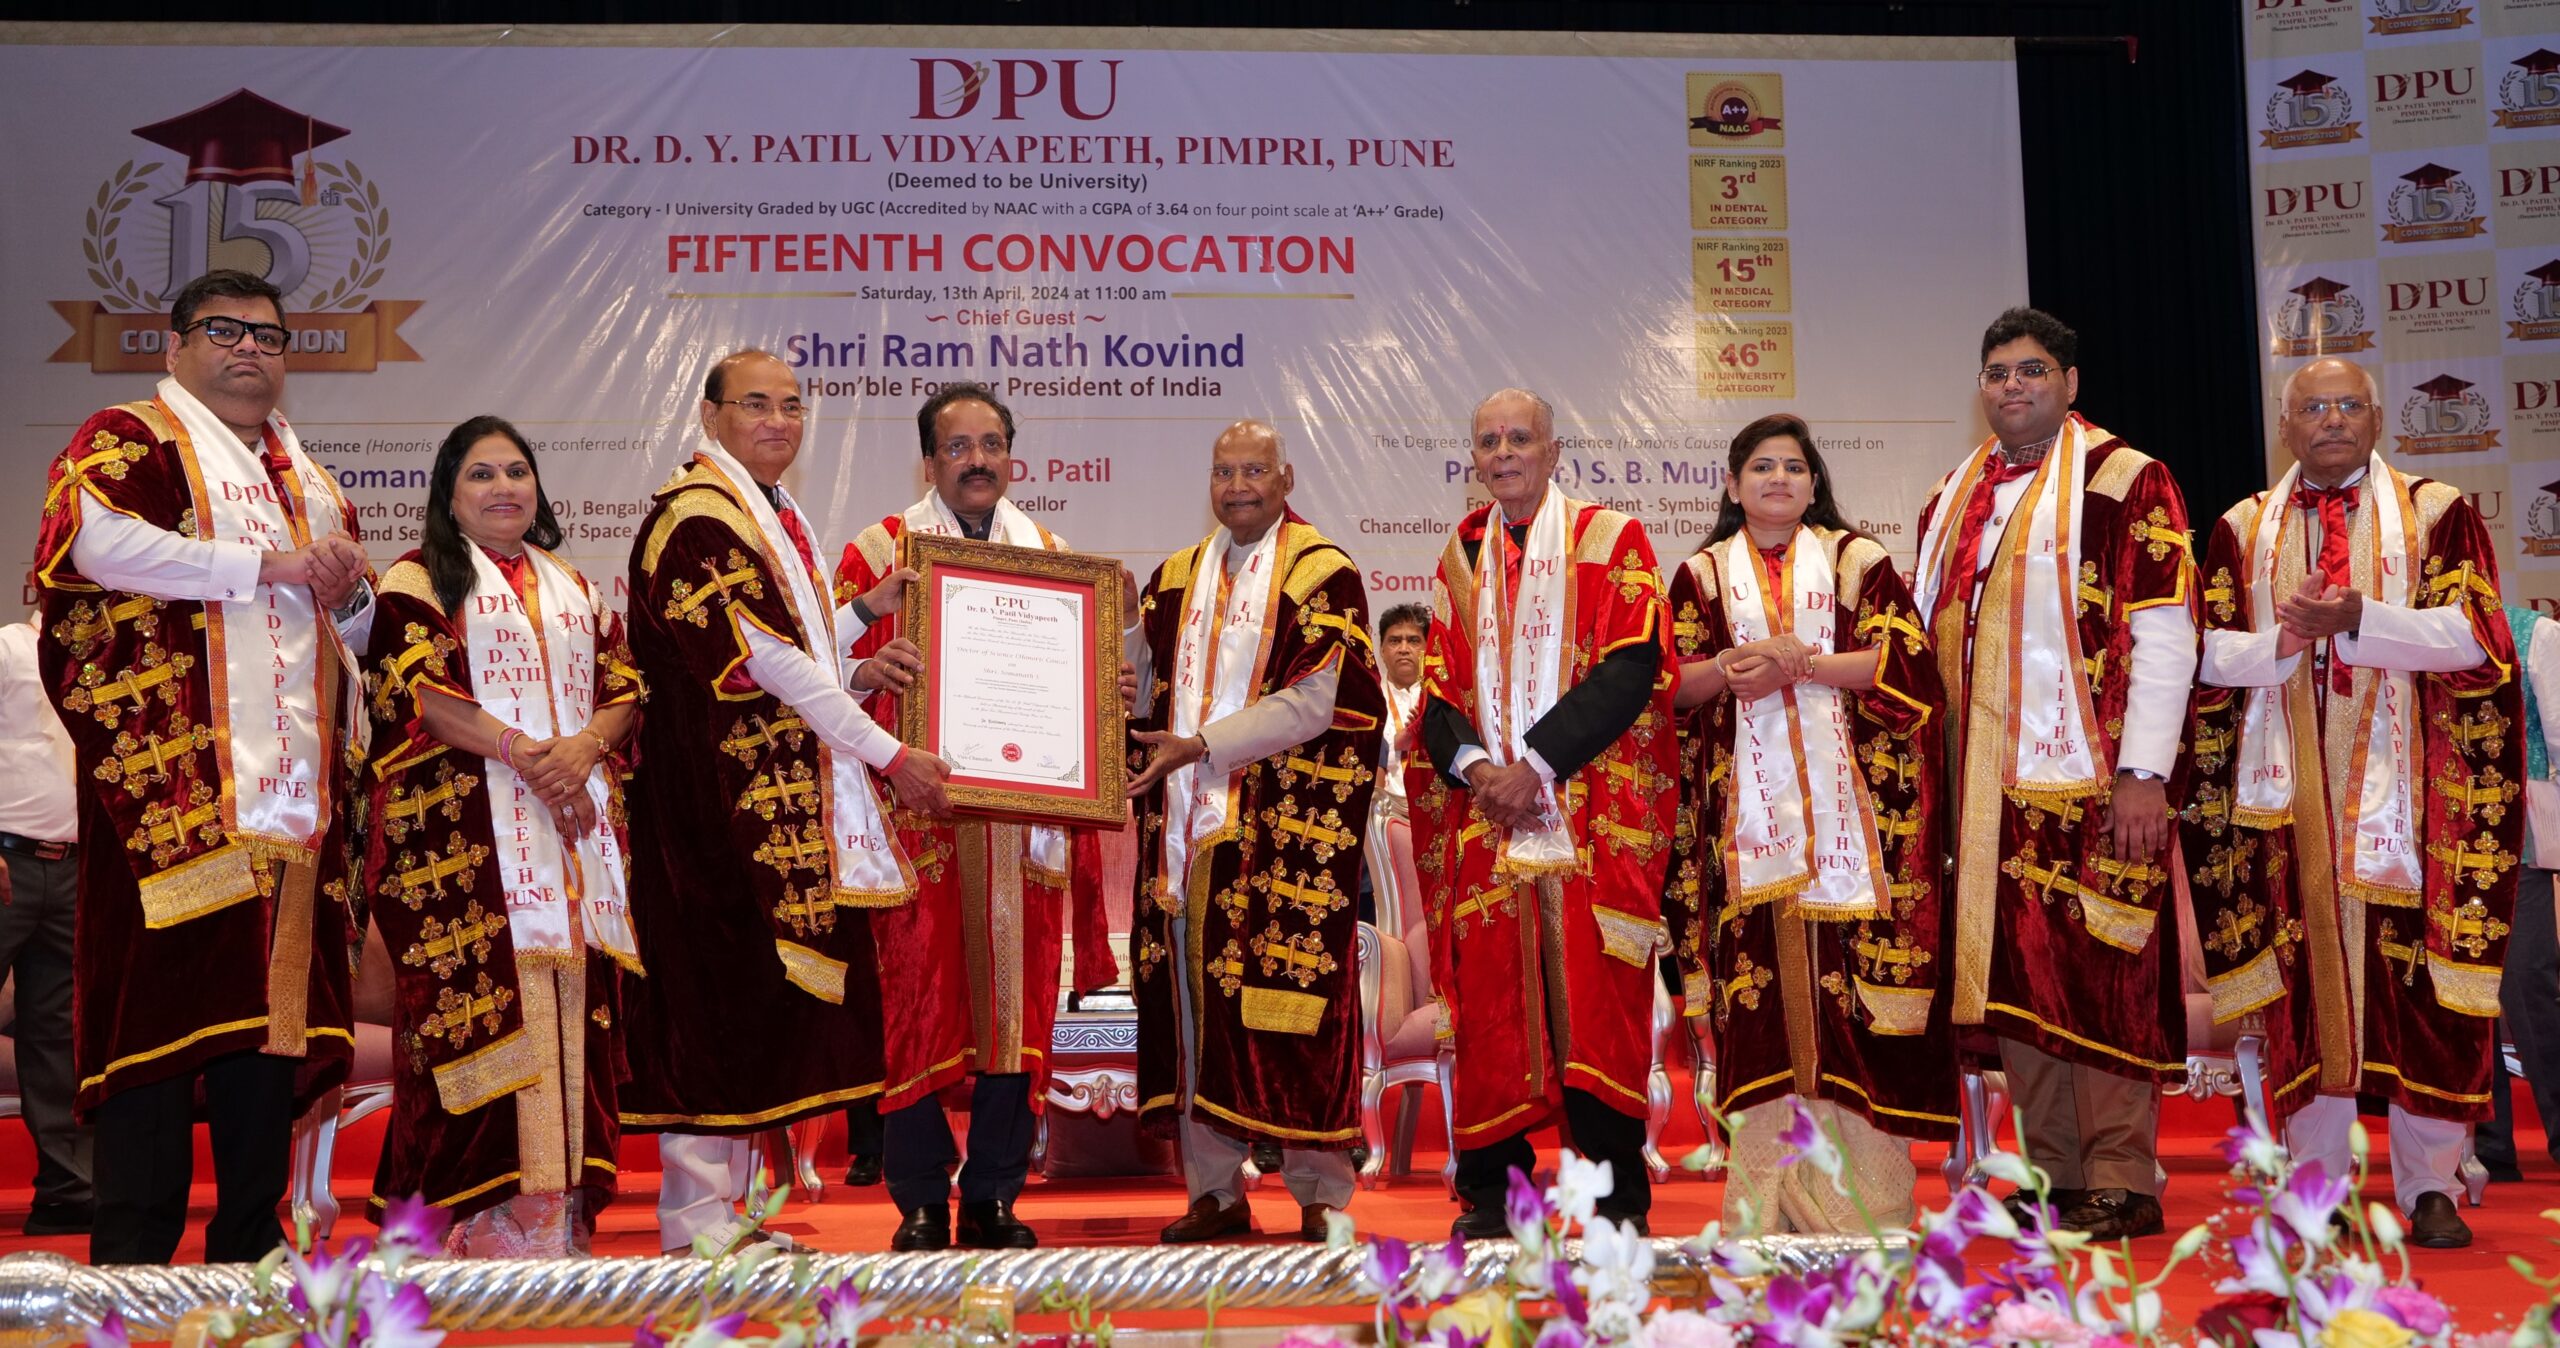 Somnath S of ISRO and Symbiosis Mujumdar awarded Doctor of Science